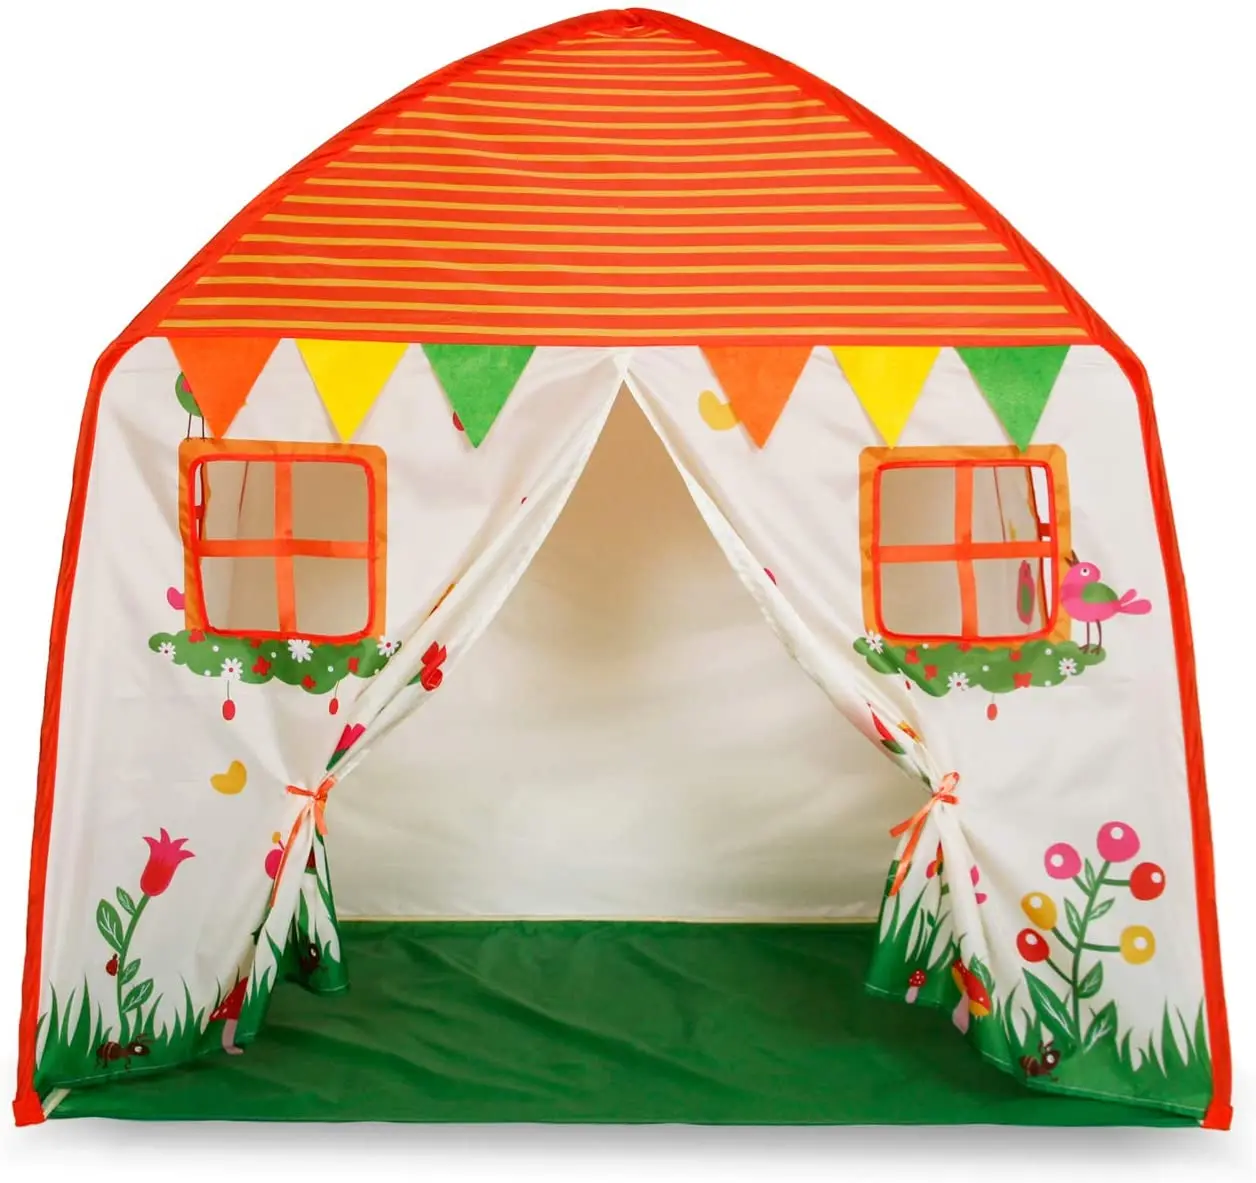 Homfu Kids Indoor and Outdoor Toy Tent Princess Prince Castle Children Play Tent 